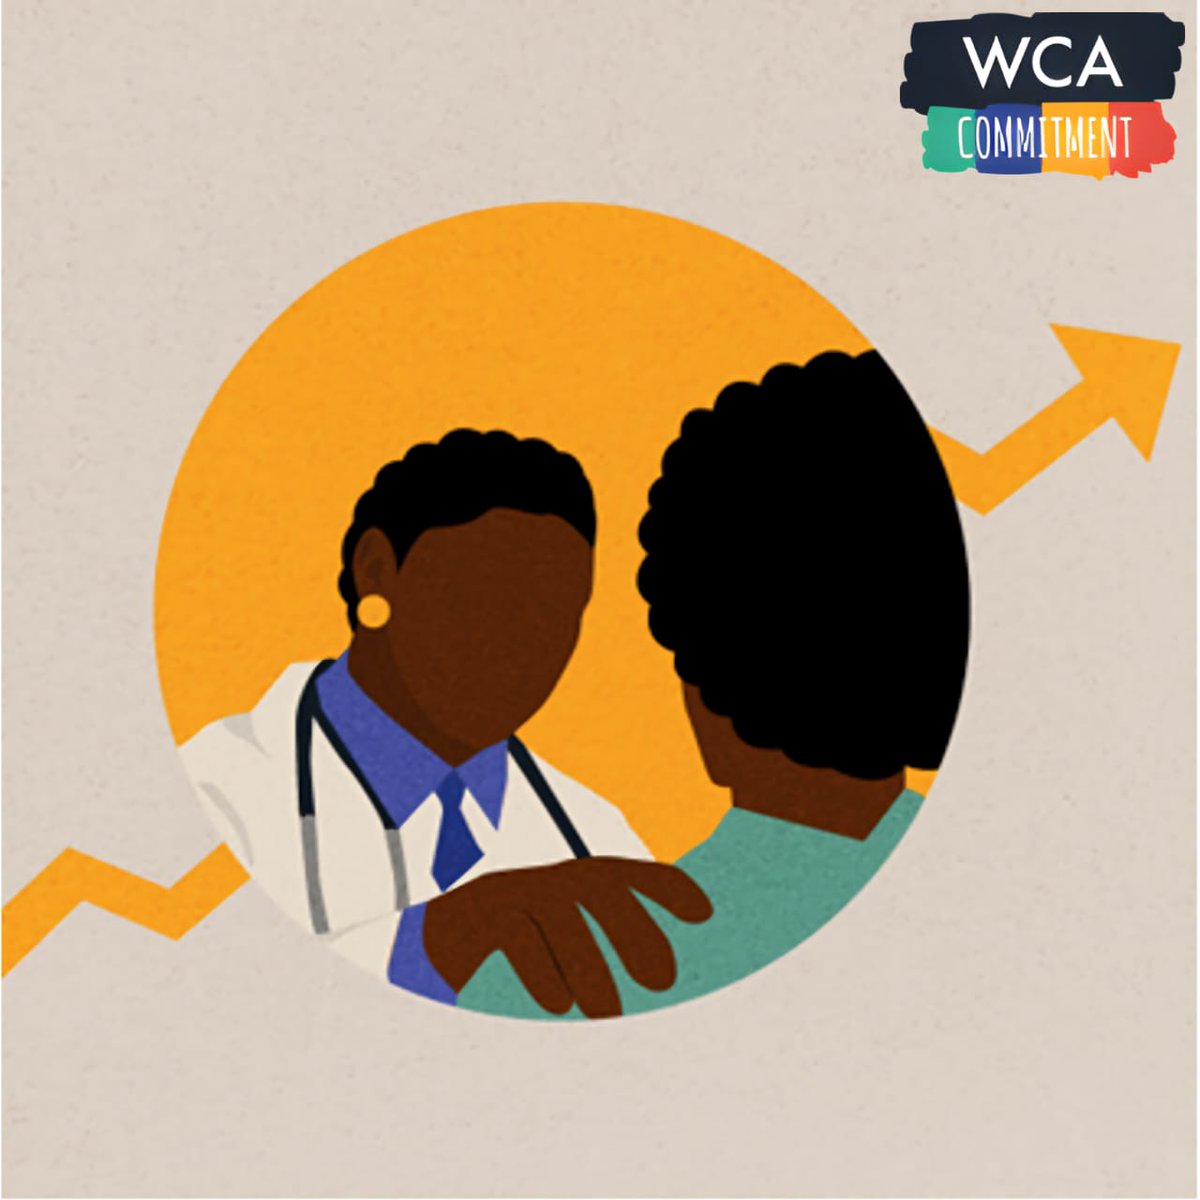 By 2027,Ministers commit to: · Inclusive policies protecting health and education rights. Education for health programmes in 50% of schools and 100% of teacher training centers 📚Youth-friendly sexual and reproductive health-care services in 75% of health facilities#WCAcommitment